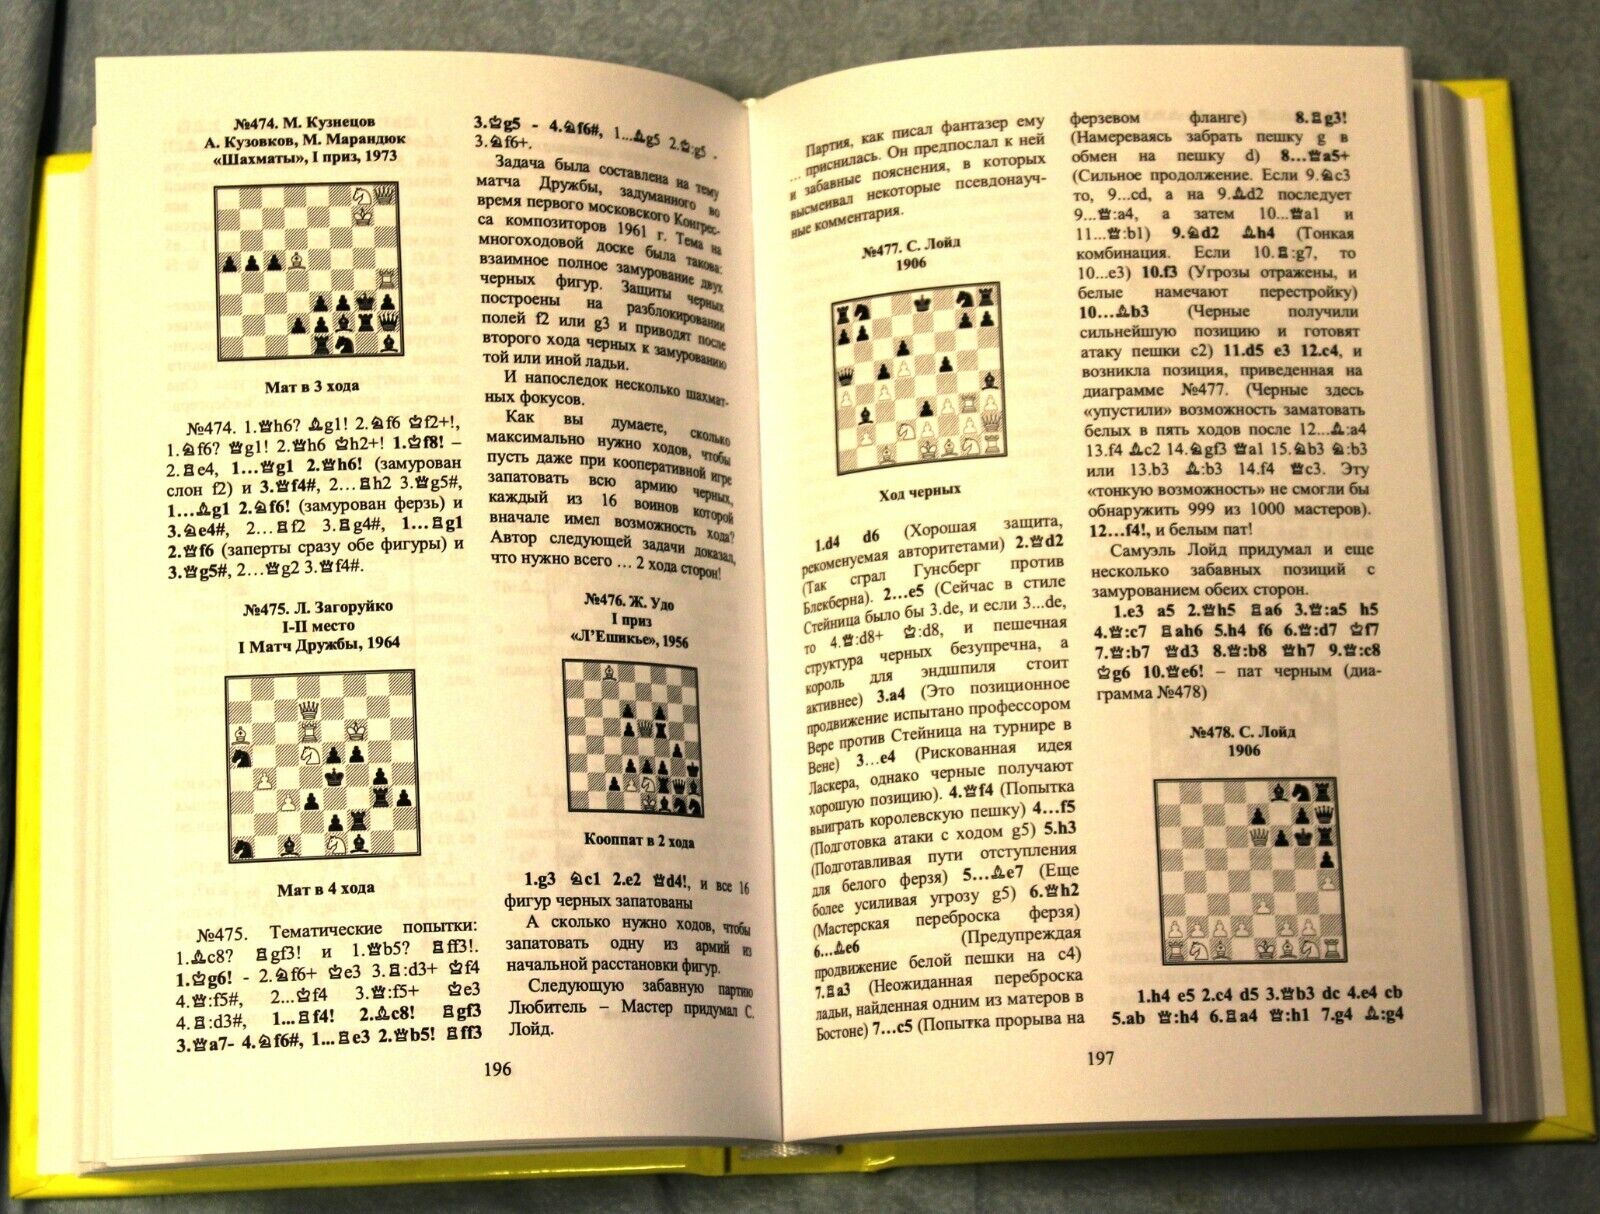 11484.Russian Chess Book. A storehouse of chess pointes. Moscow, 2019. Only 52 copies!